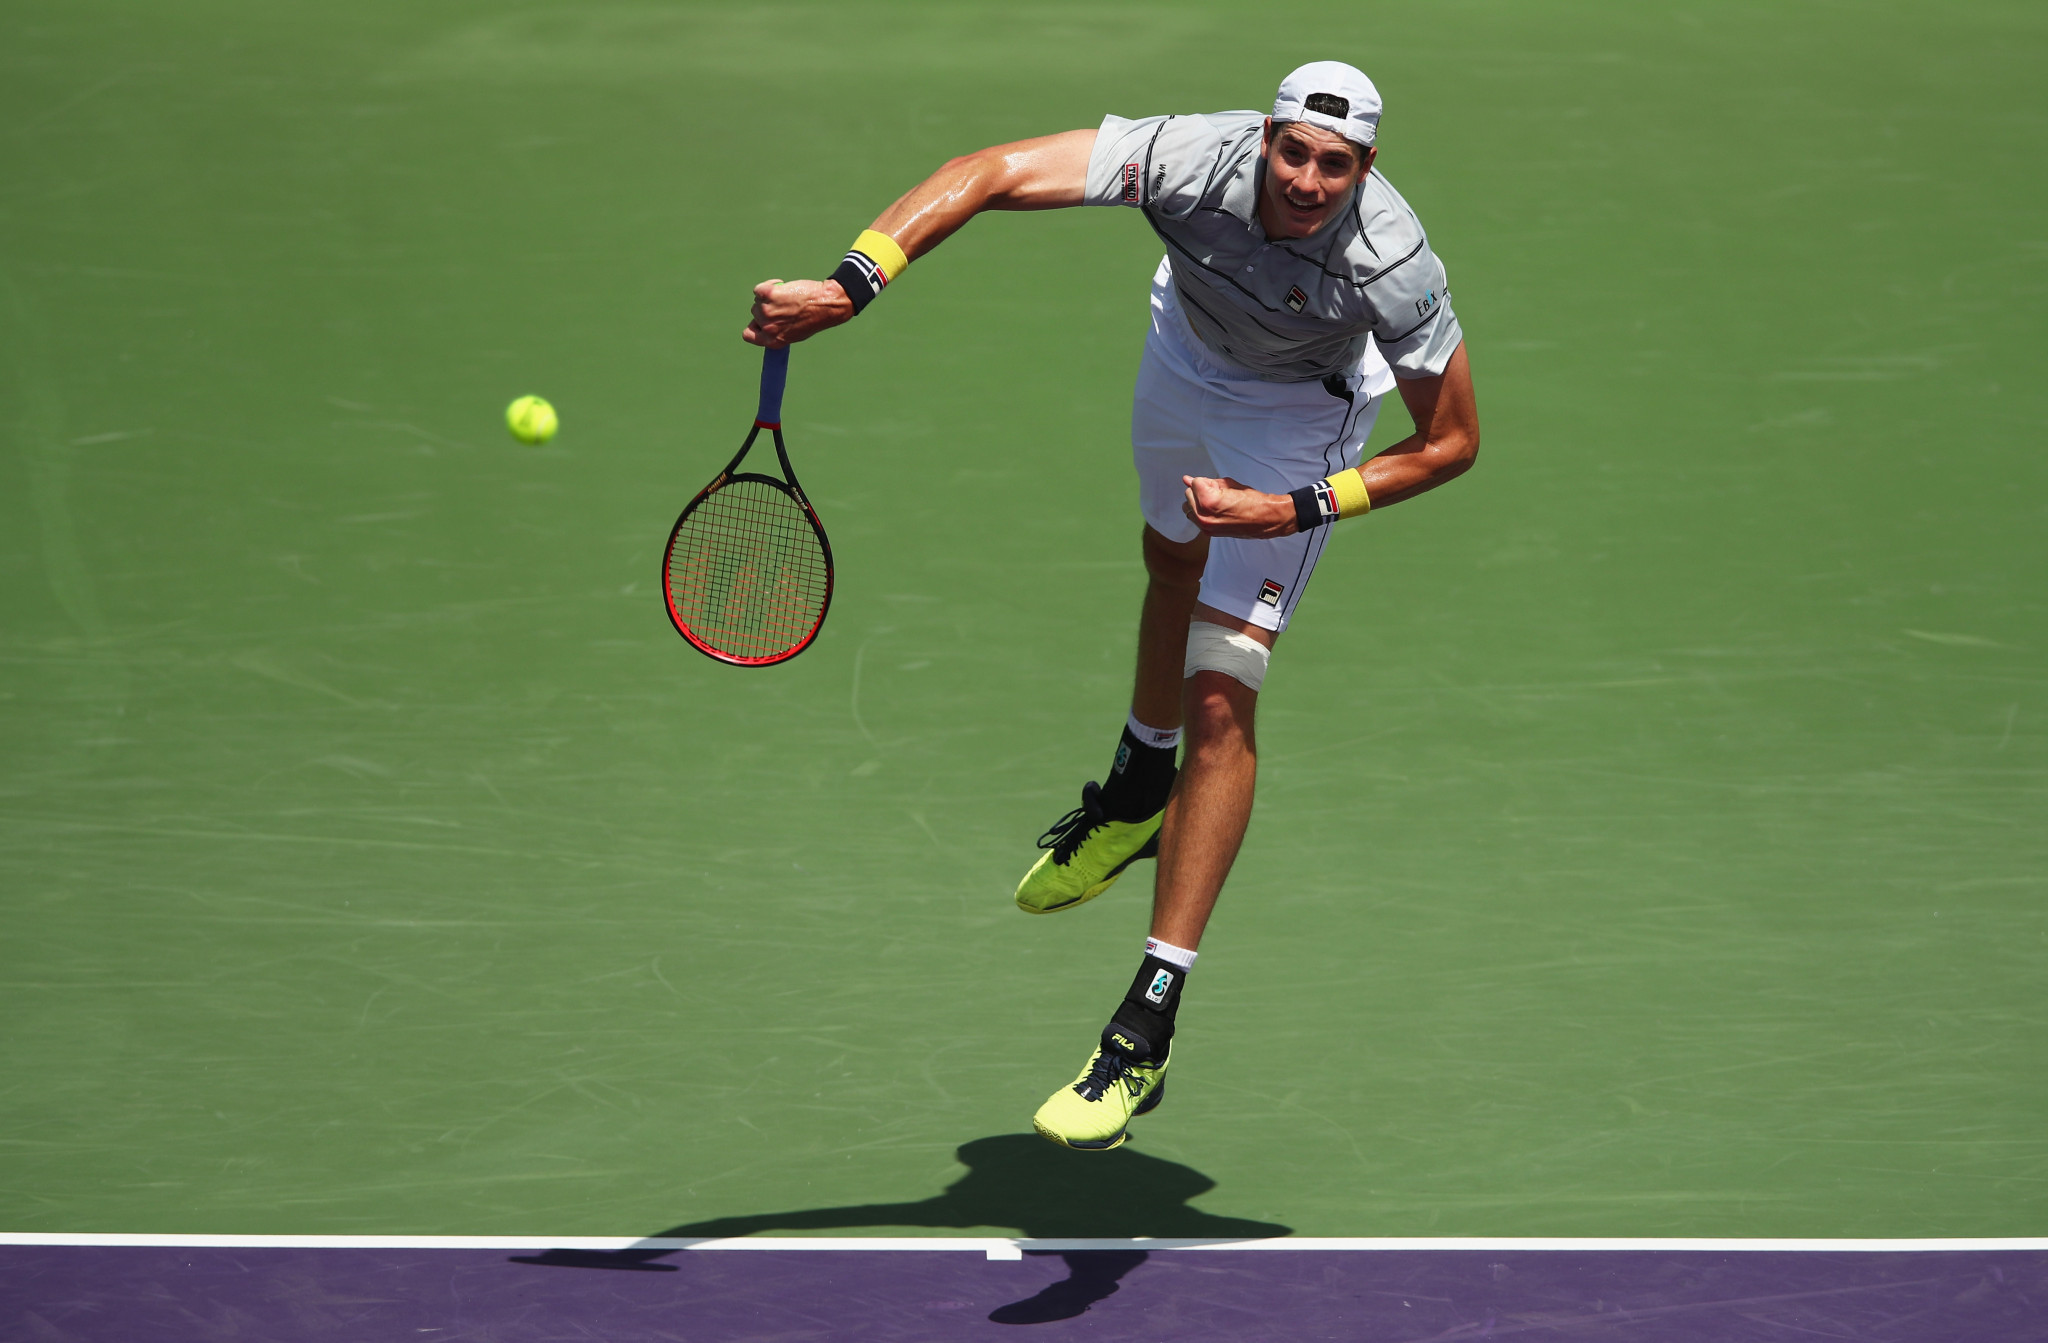 Isner beats second seed Cilic to reach quarterfinals of Miami Open